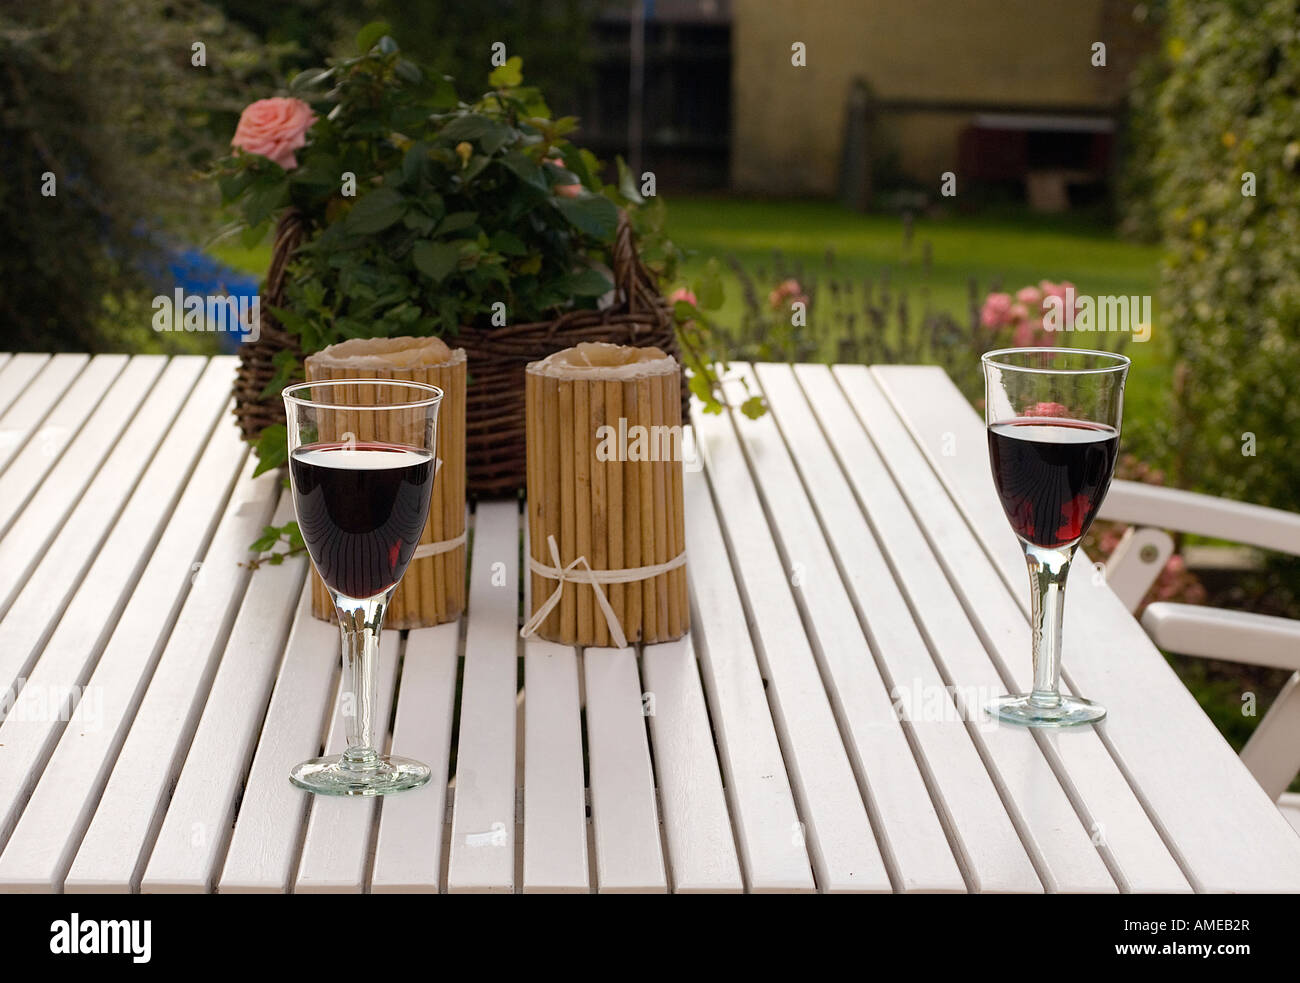 Garden table with glasses of redwine Midsummer atmosphere Stock Photo